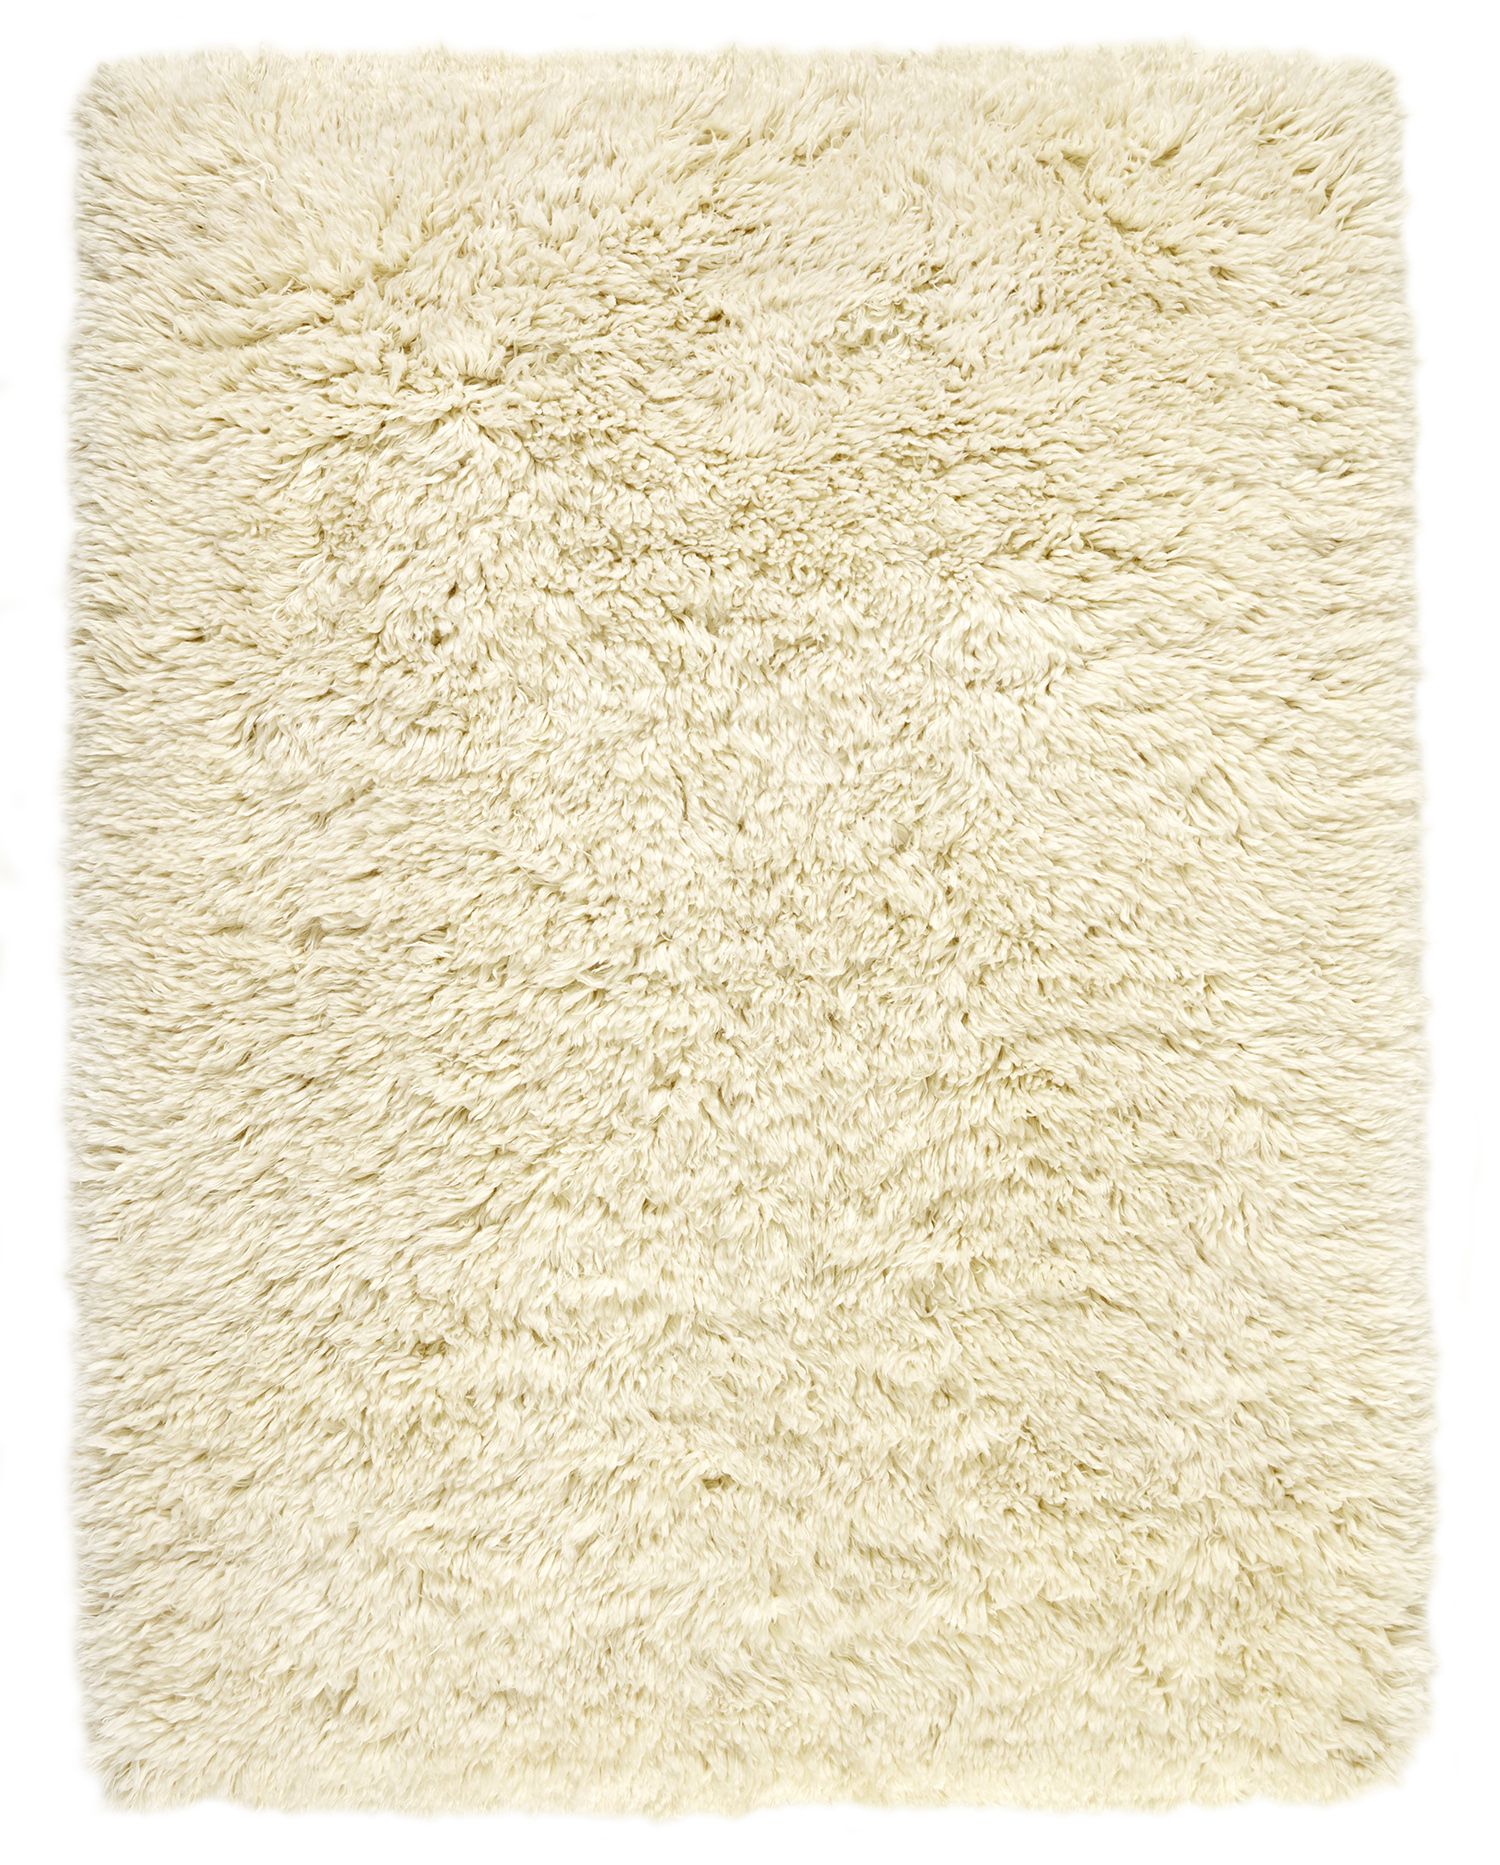 Beige Wool Shaggy Rug – Snow White Ivory Inside Snow White Rugs (View 14 of 15)